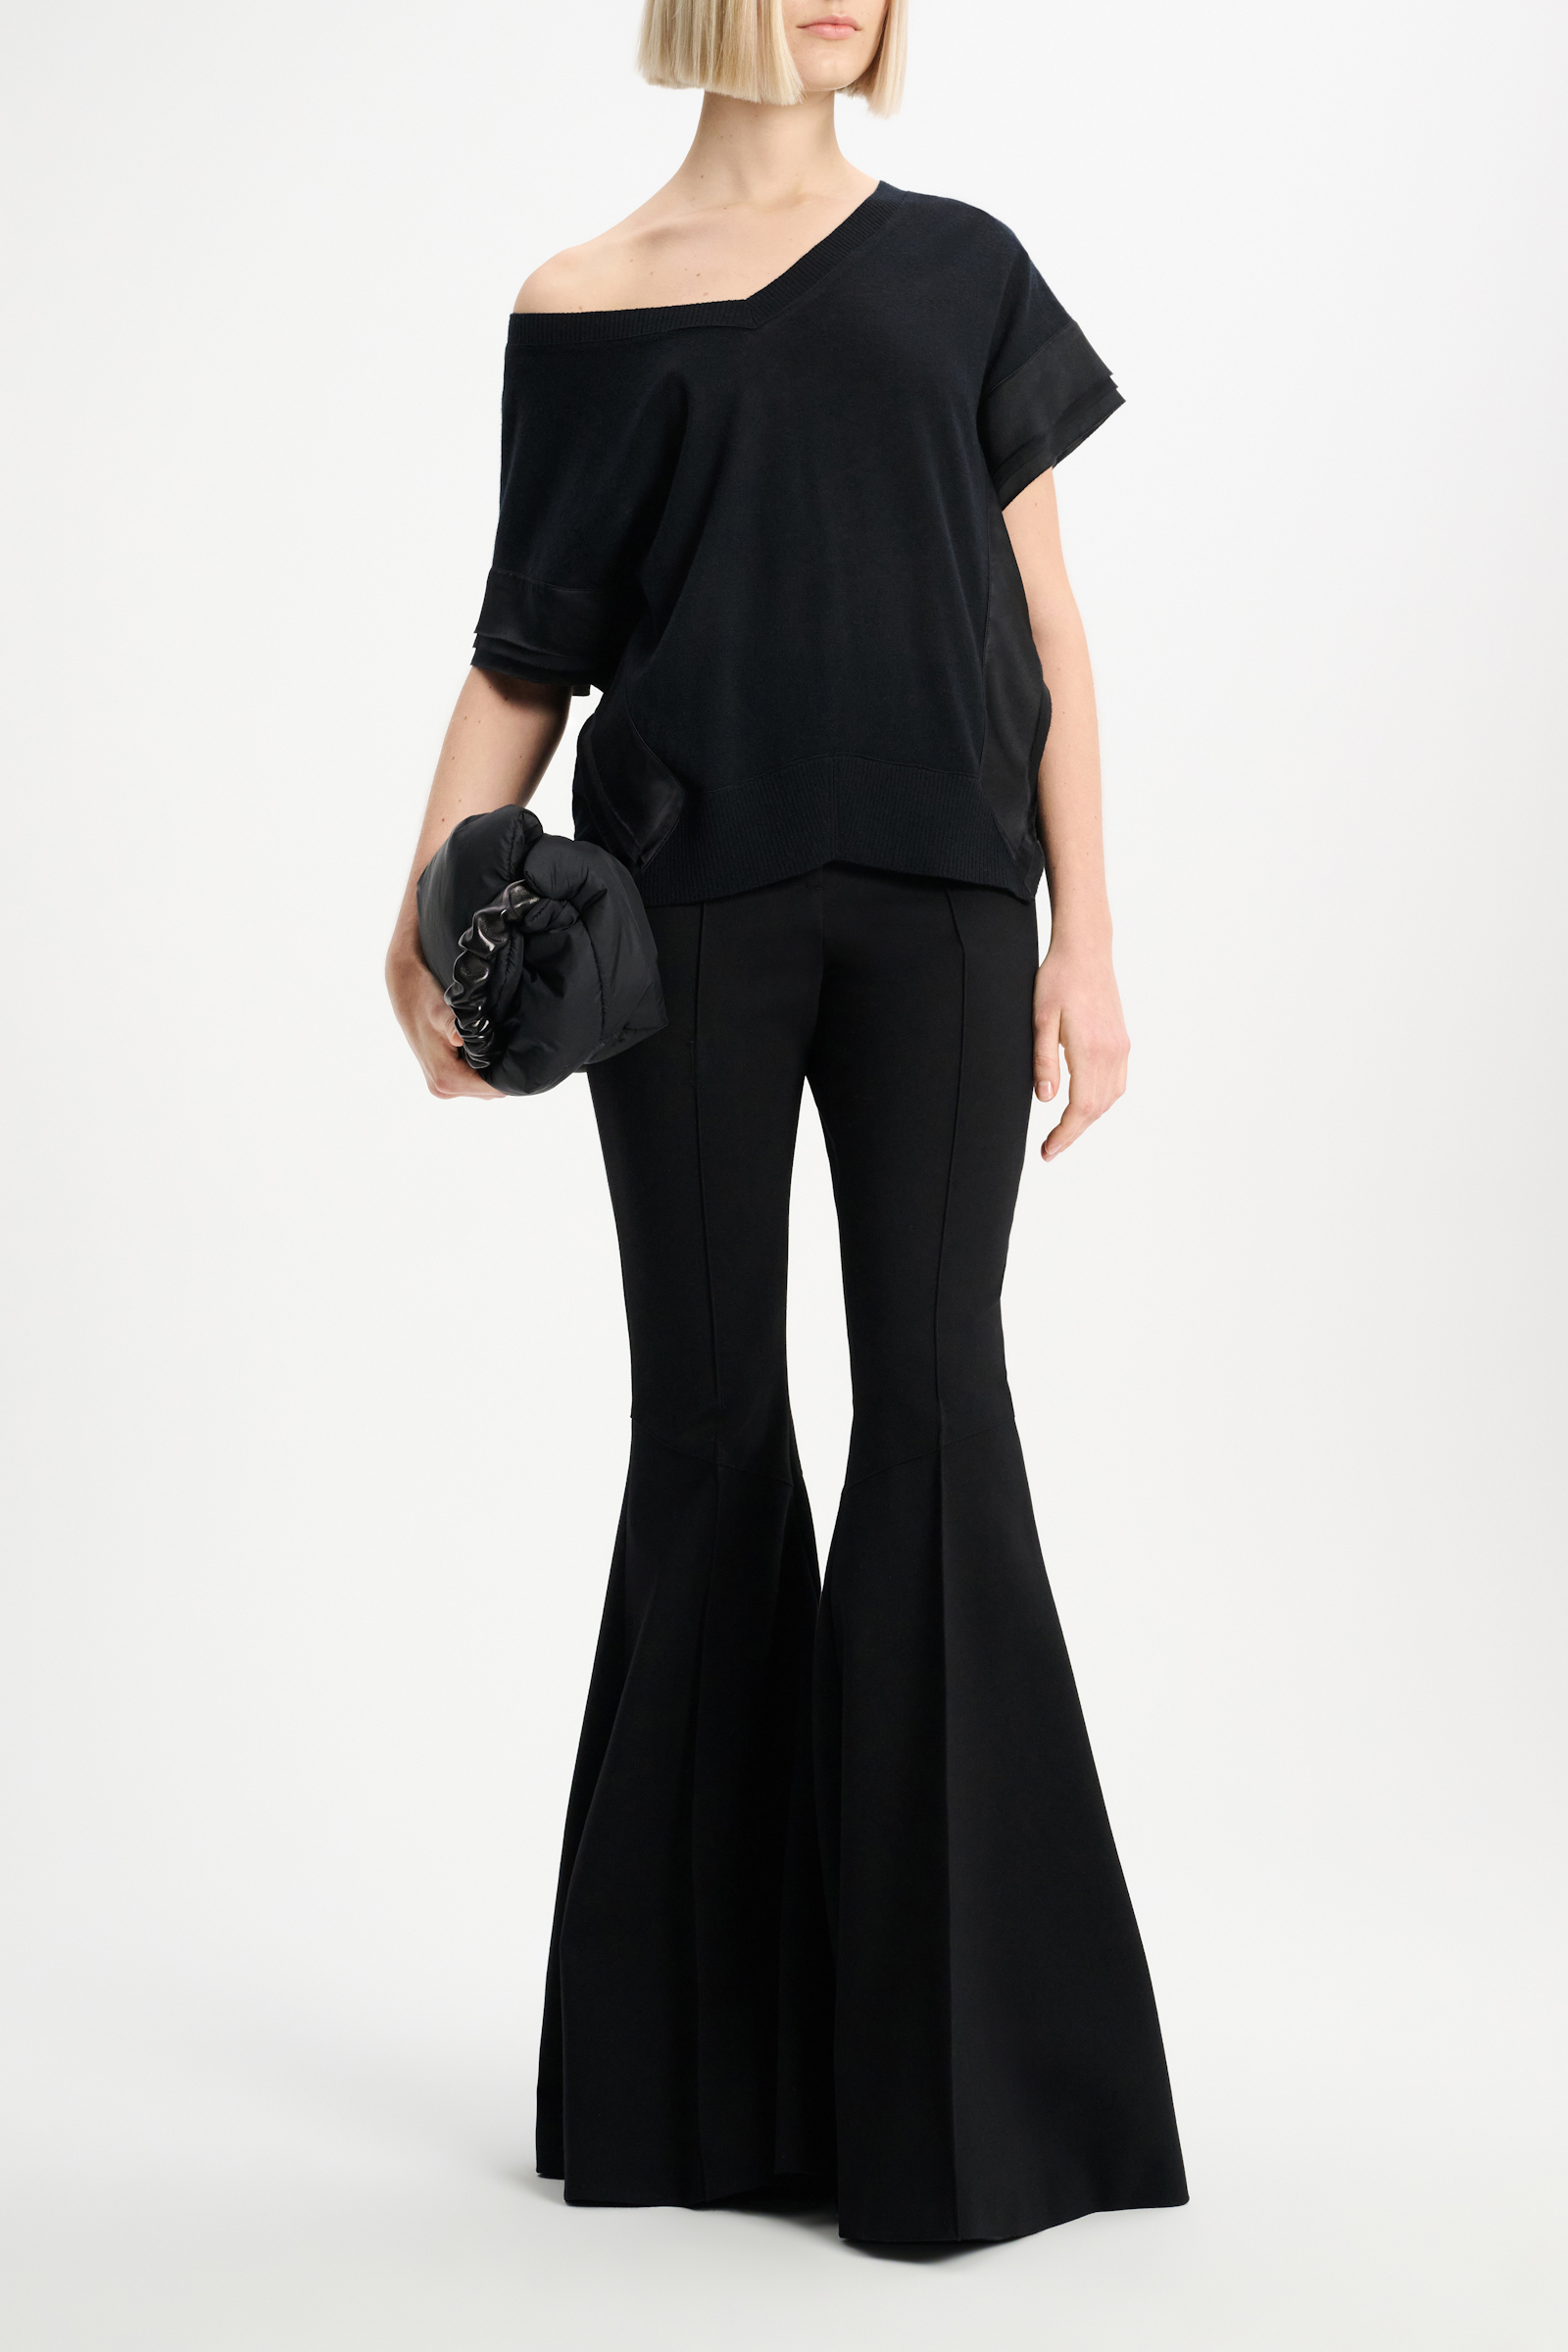 Dorothee Schumacher Wool-cashmere knit top with layered satin trim pure black